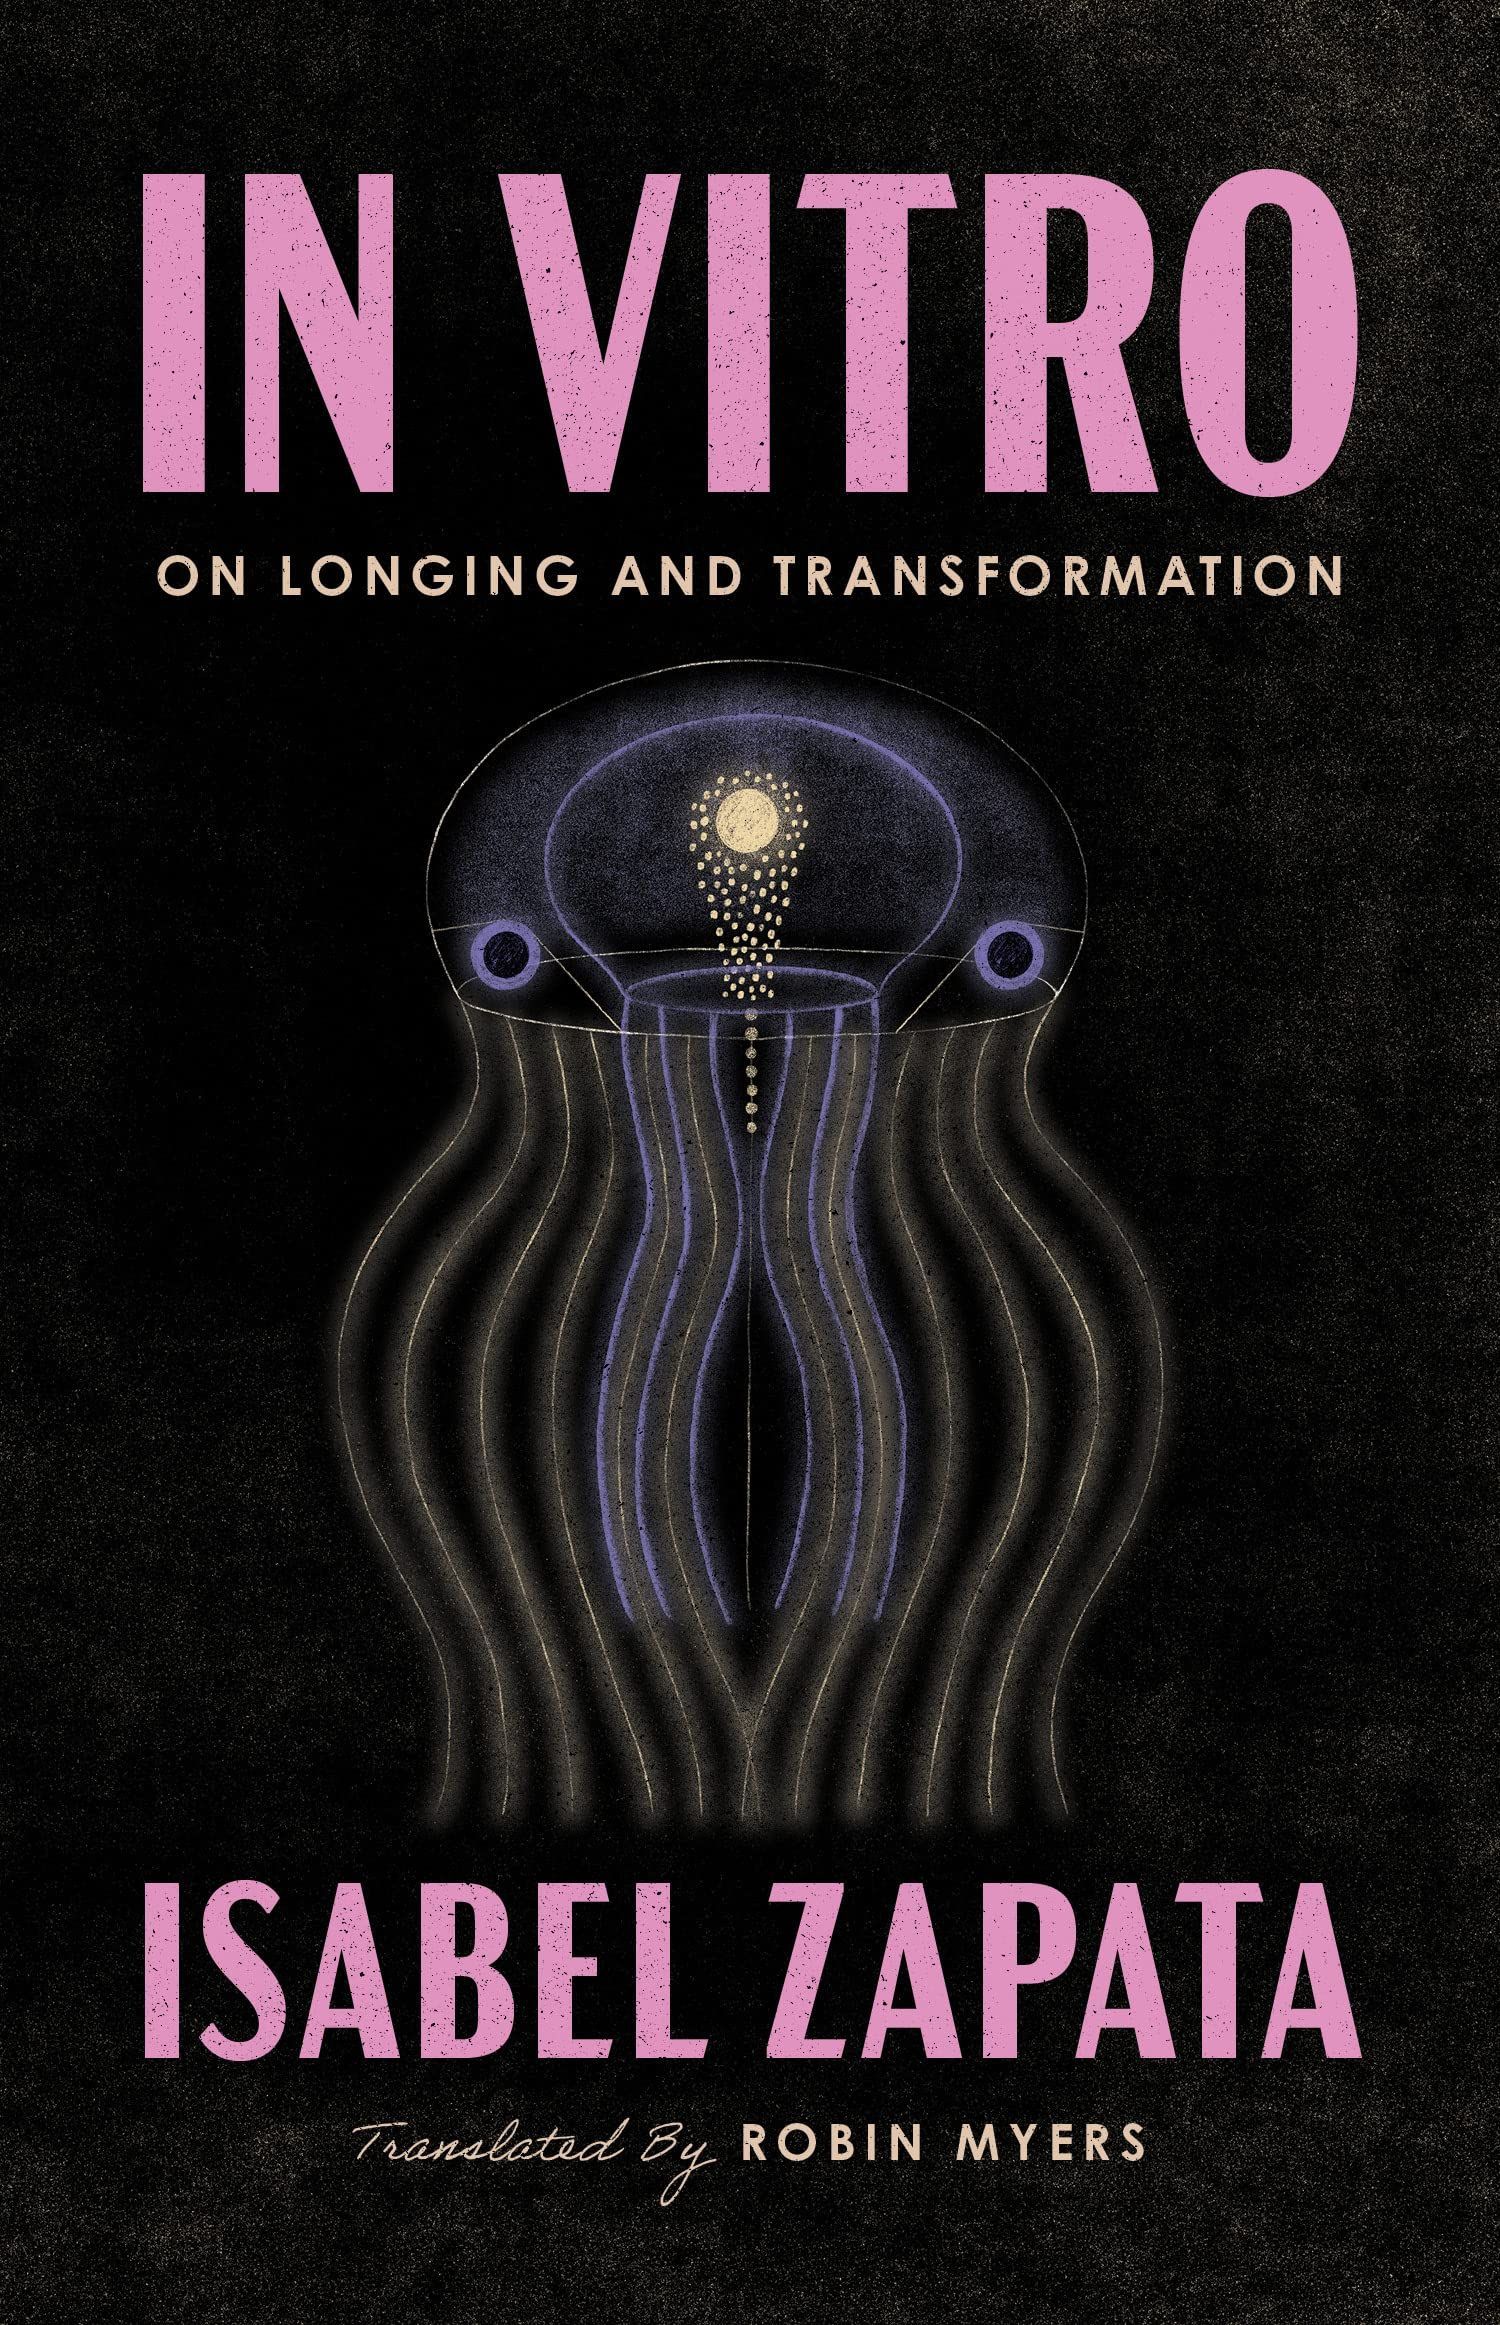 Uncomfortable Somethings: On Isabel Zapata’s “In Vitro”